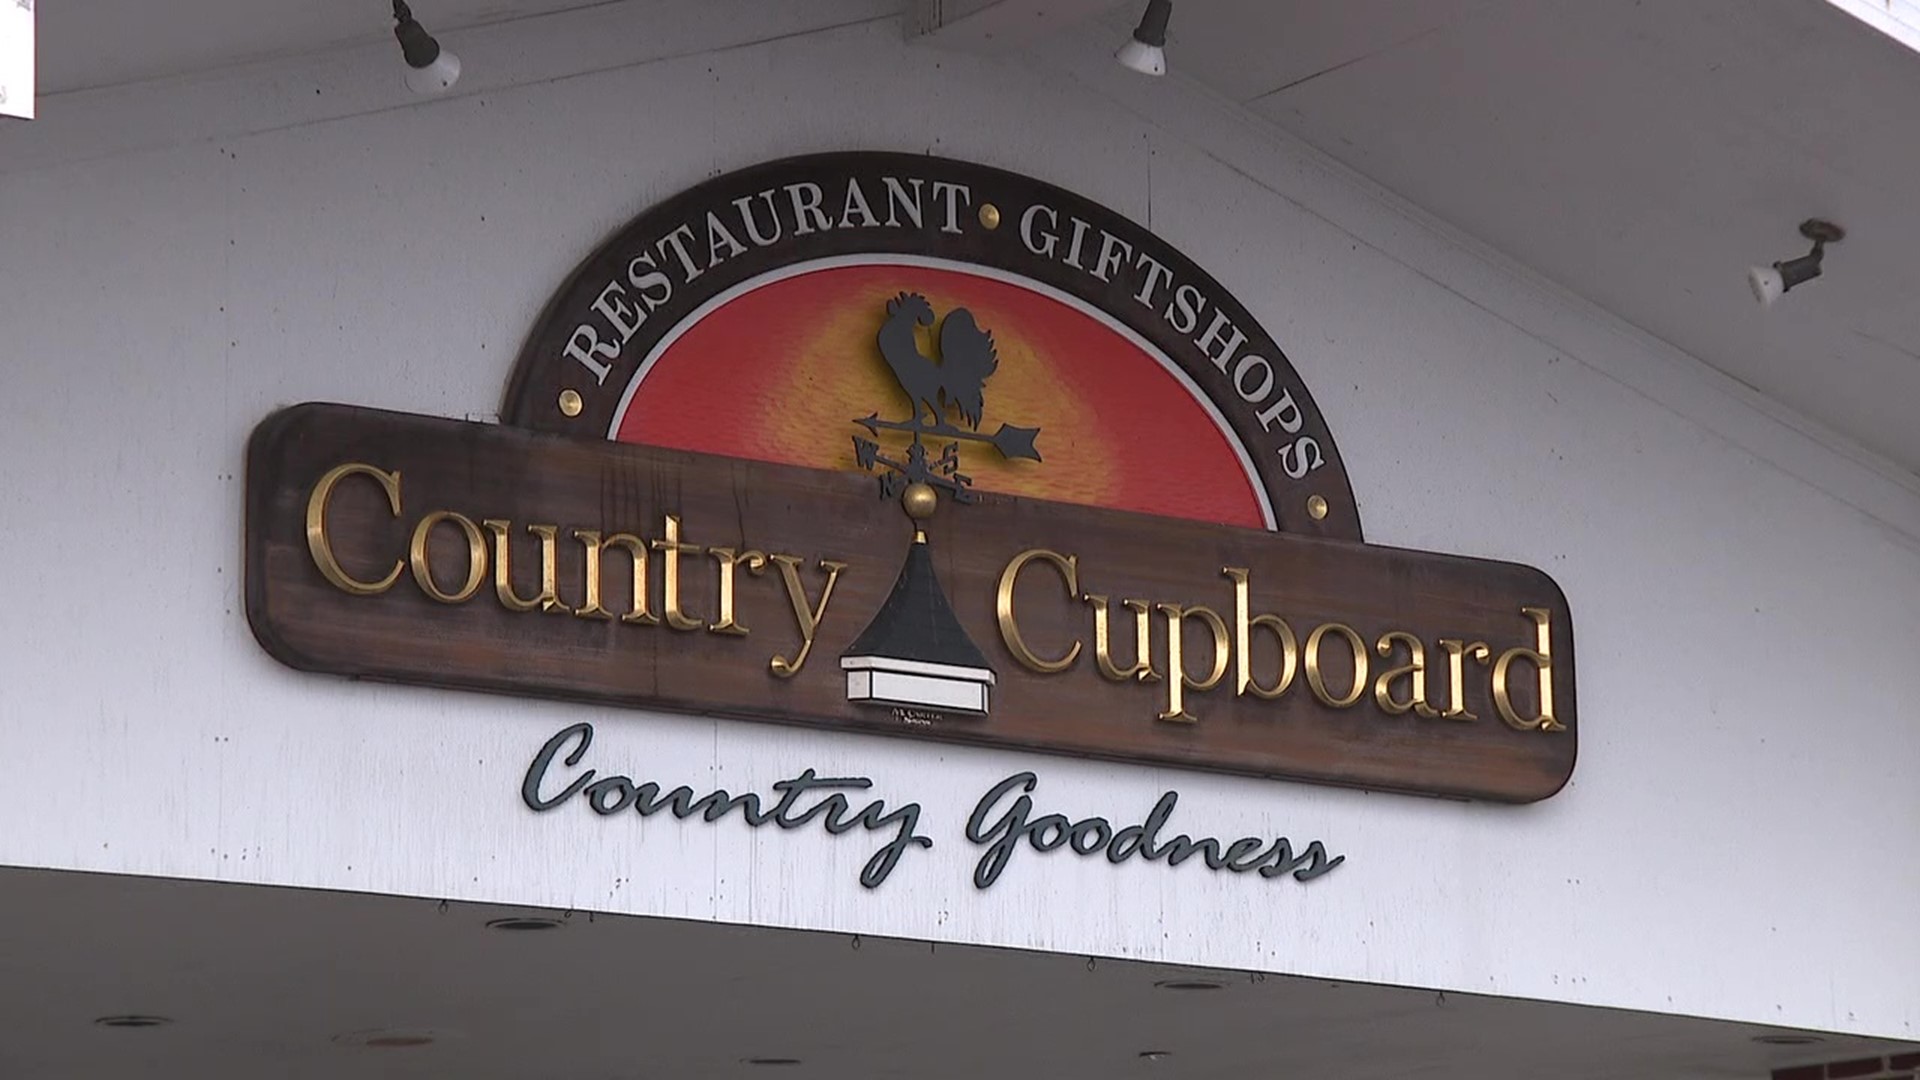 Now that the popular restaurant in Union County is closed, everything inside is being auctioned off.